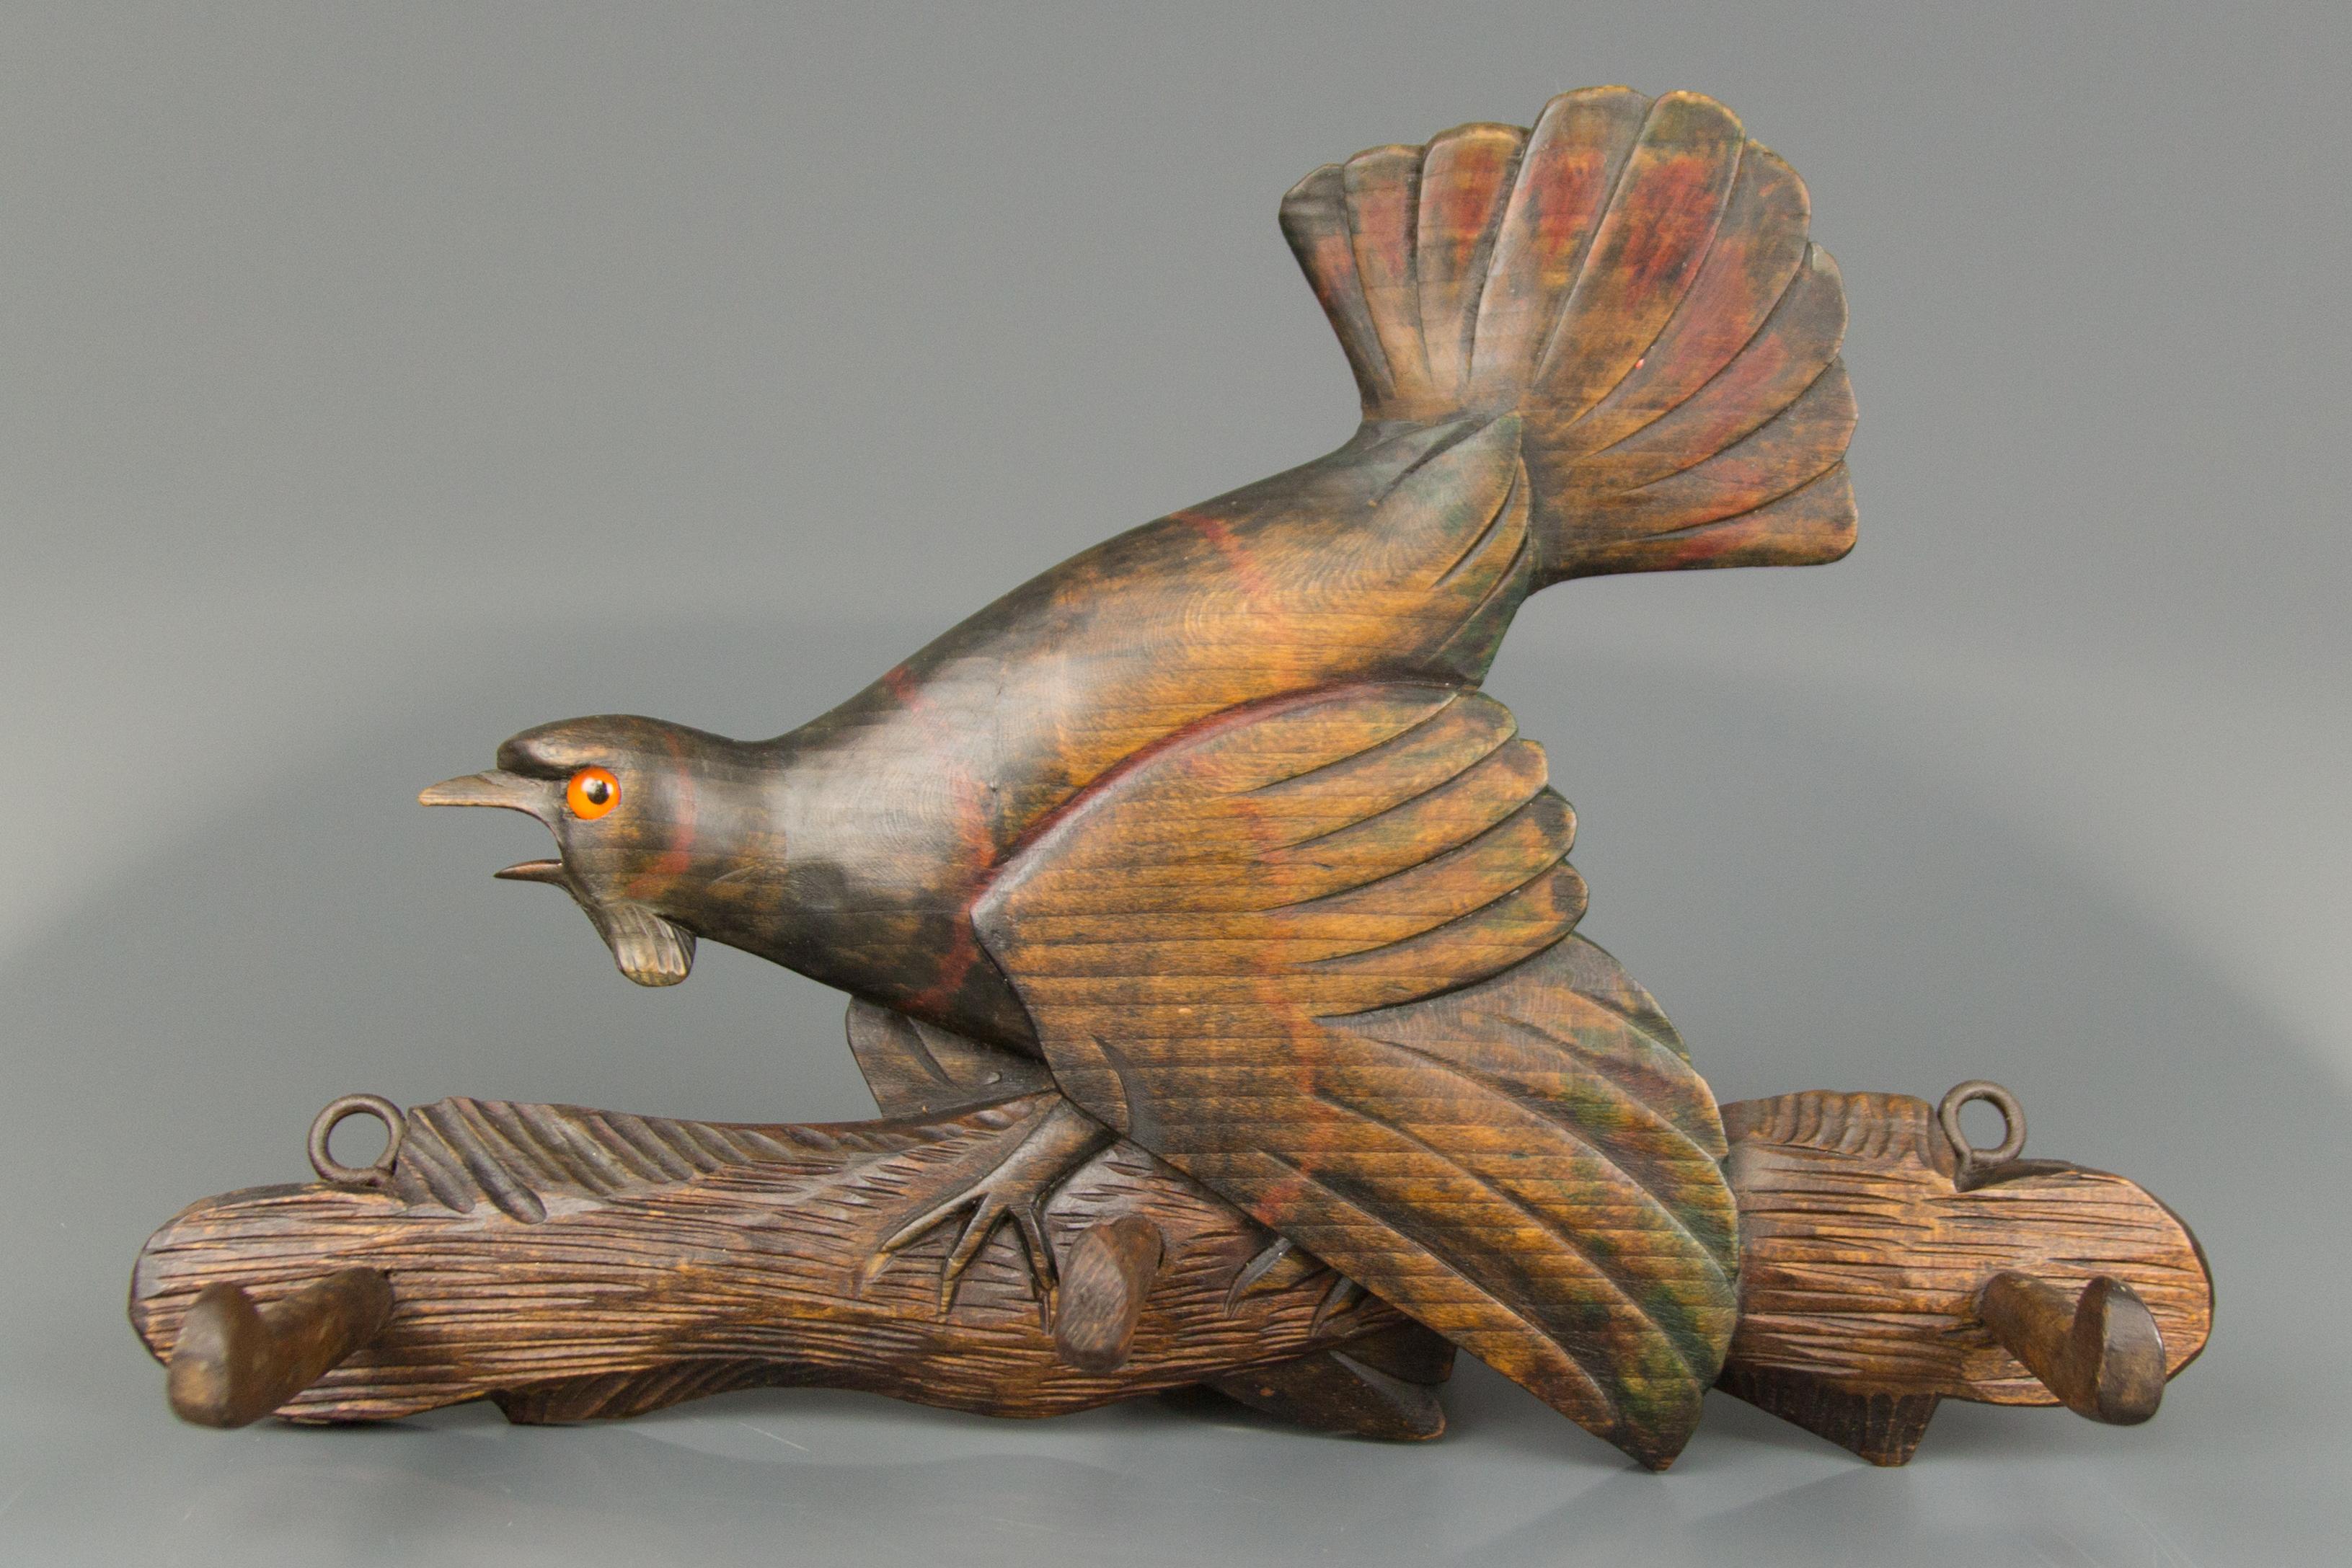 Beautiful Black Forest hand carved wood wall mount coat rack with three wooden hooks. An expressive hand carved figure of a capercaillie, which is very slightly colored in red and green, Germany, early 20th century.
Dimensions: height 24 cm / 9.44